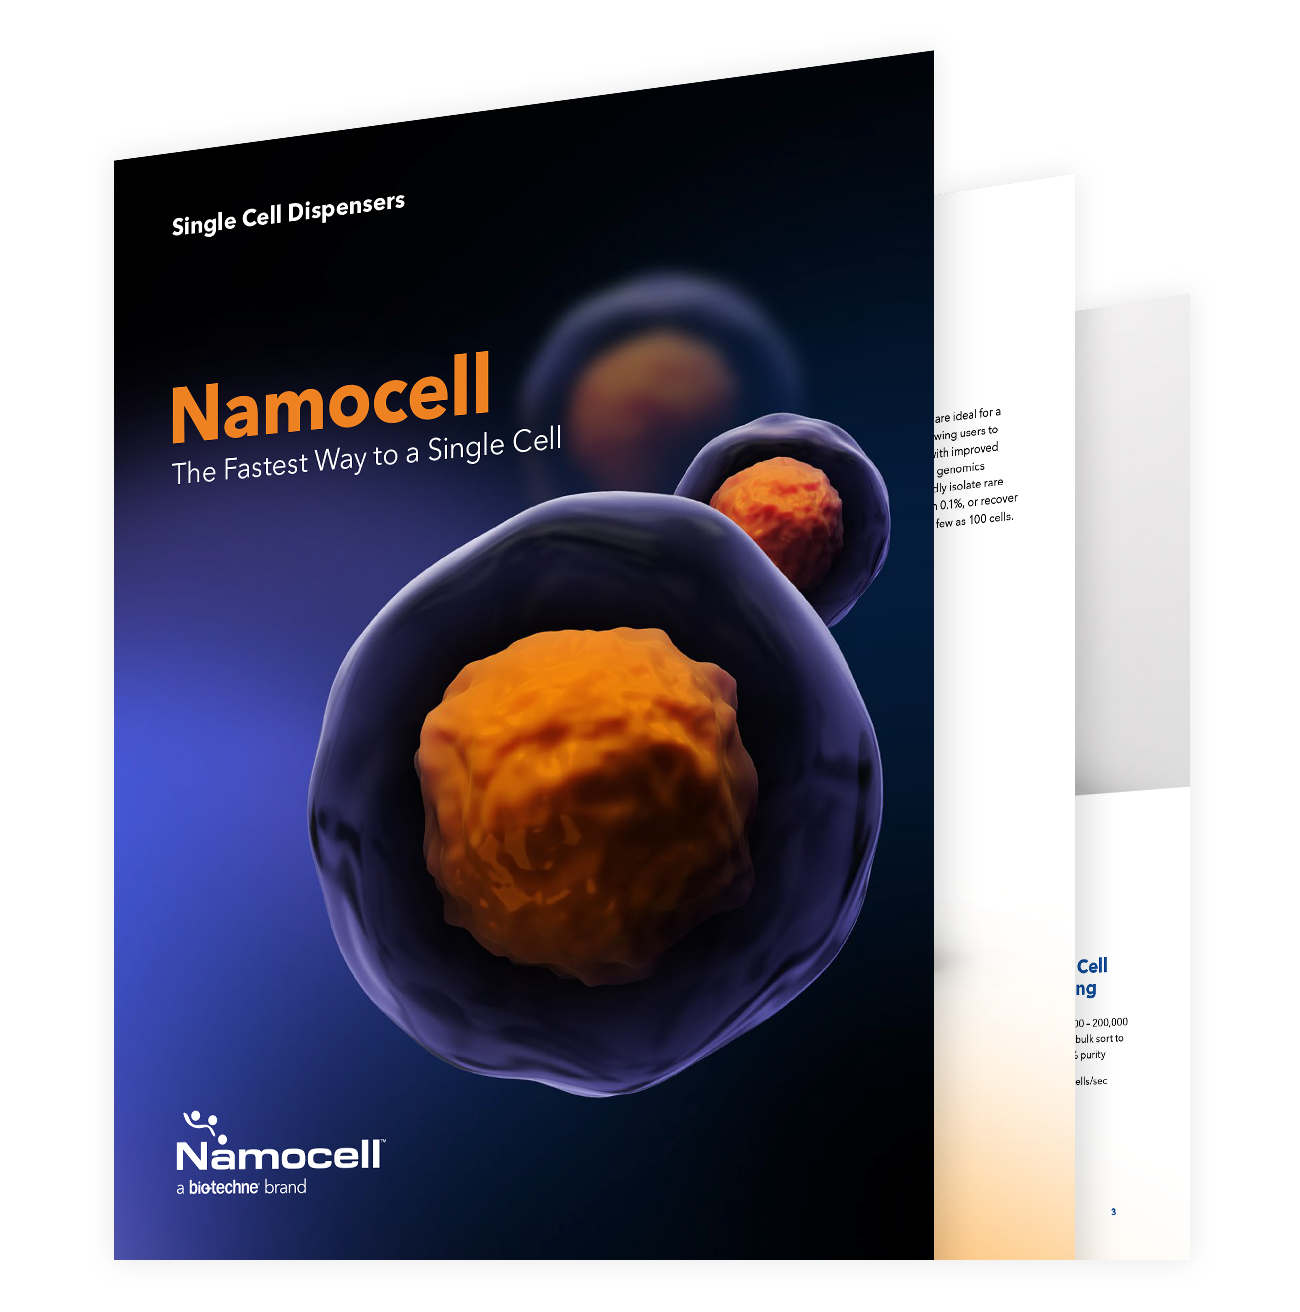 Learn how Namocell single cell dispensers enable single cell sorting and isolation.  Using microfluidics-based technology Namocell enables gentle sorting that preserves cell viability.